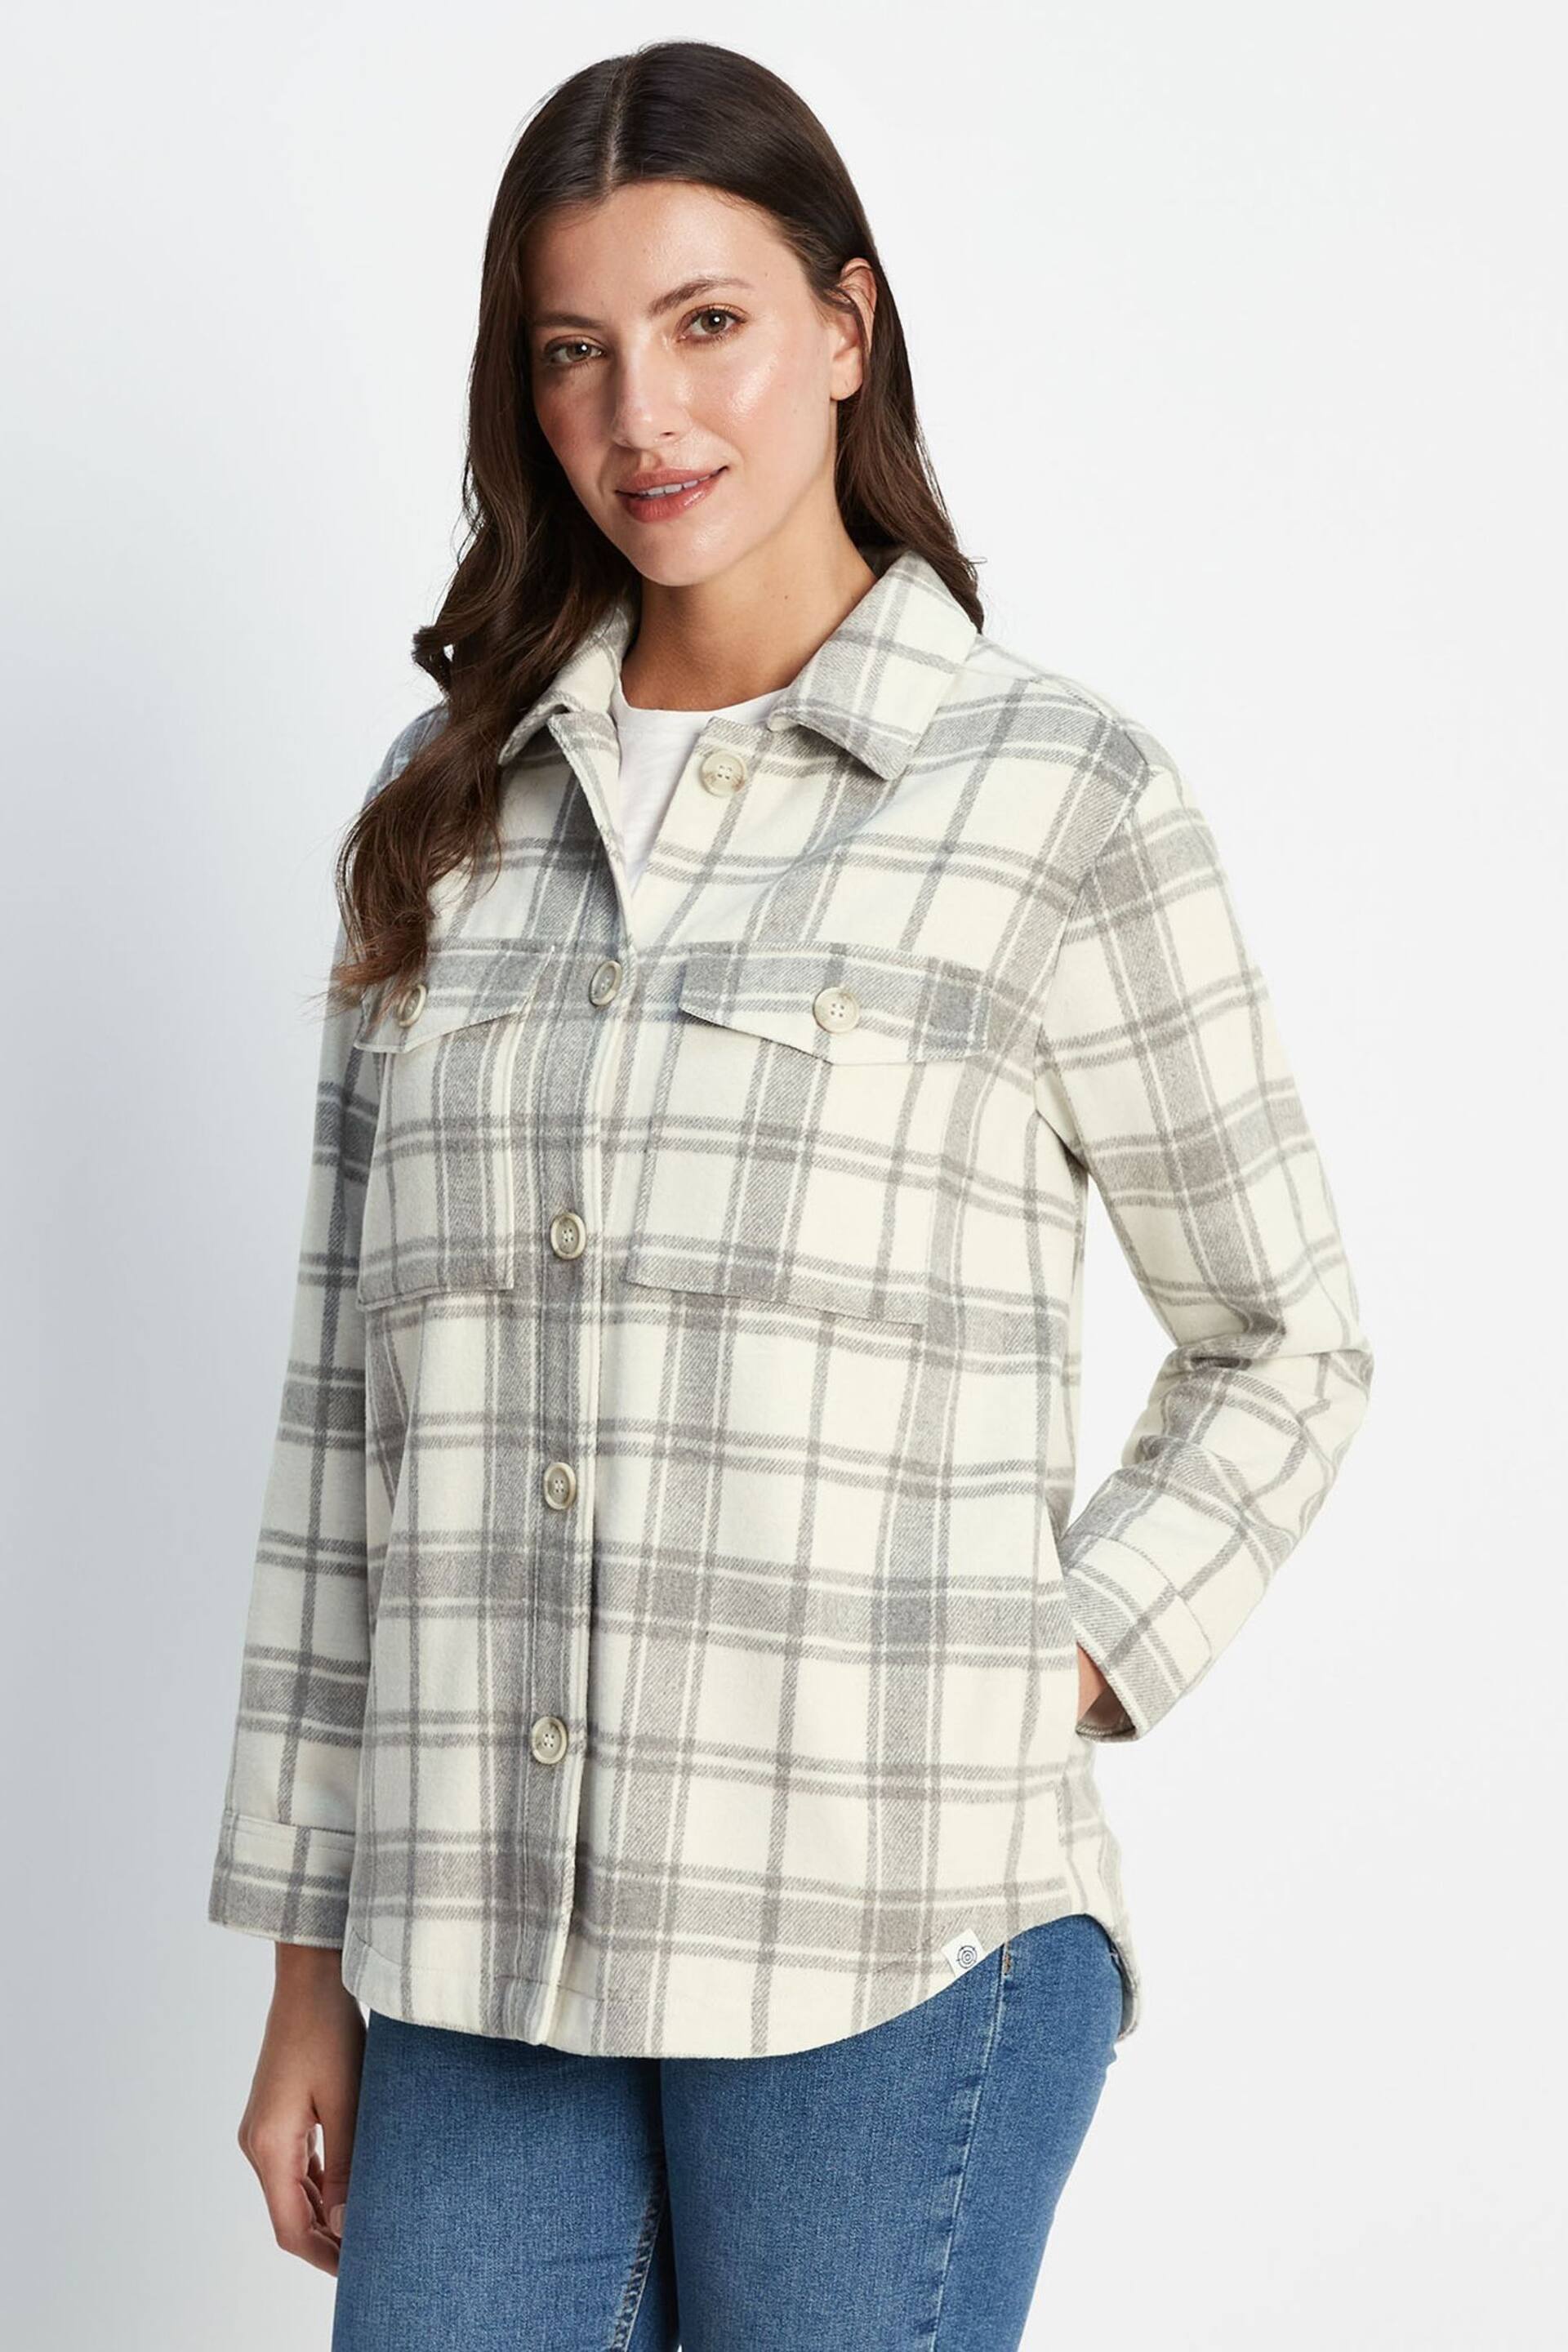 Tog 24 Grey Carrie Shirt - Image 1 of 7